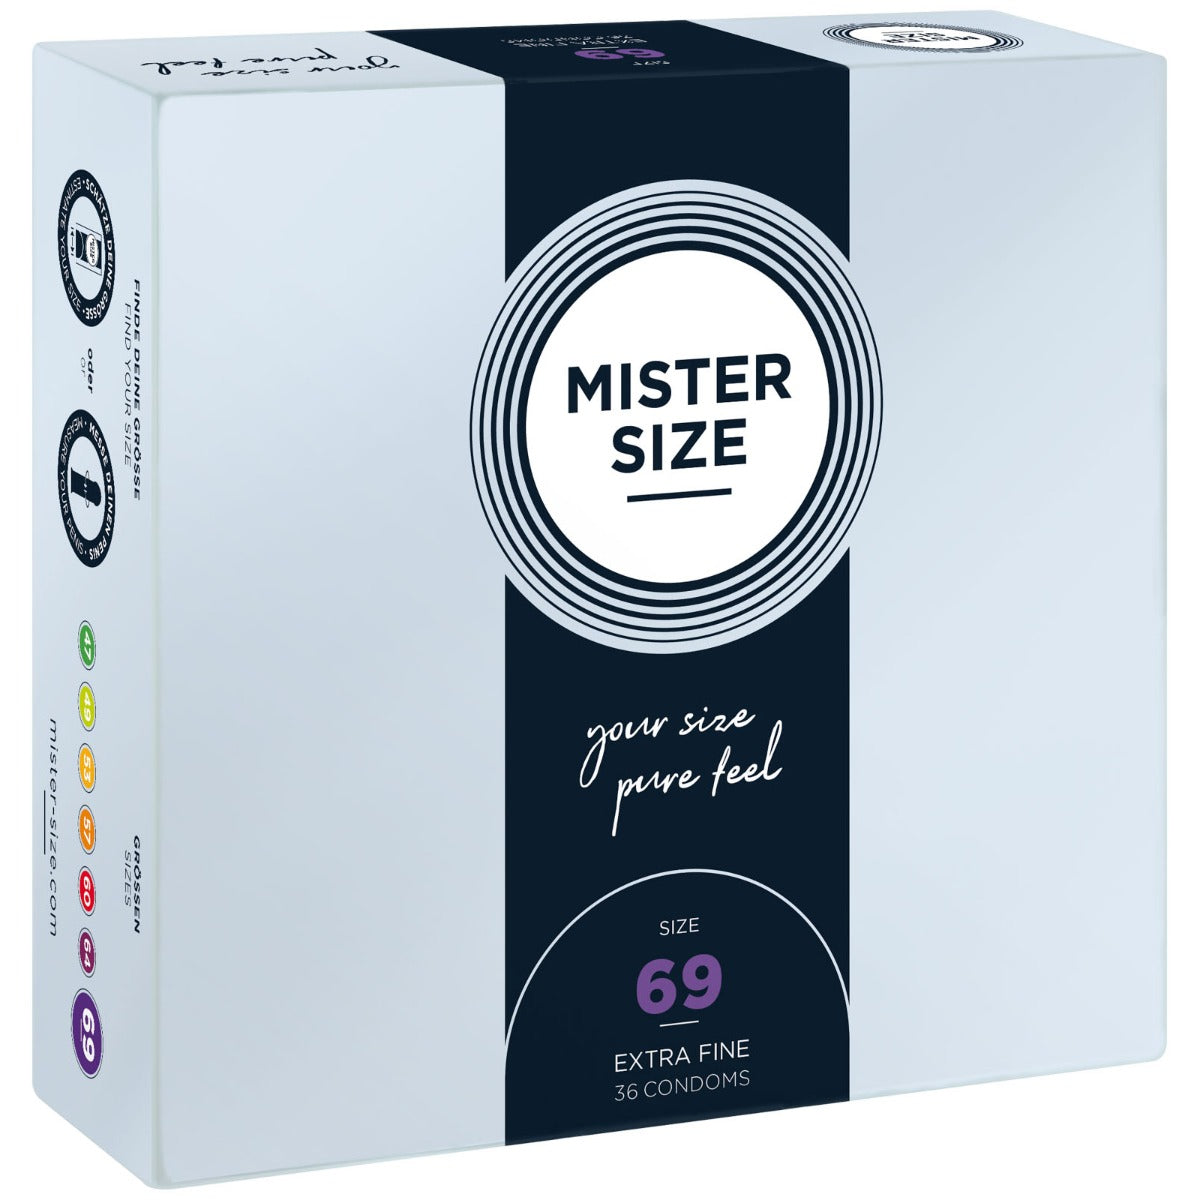 MISTER SIZE | Pure feel Condoms - Size 69 mm (36 pack)